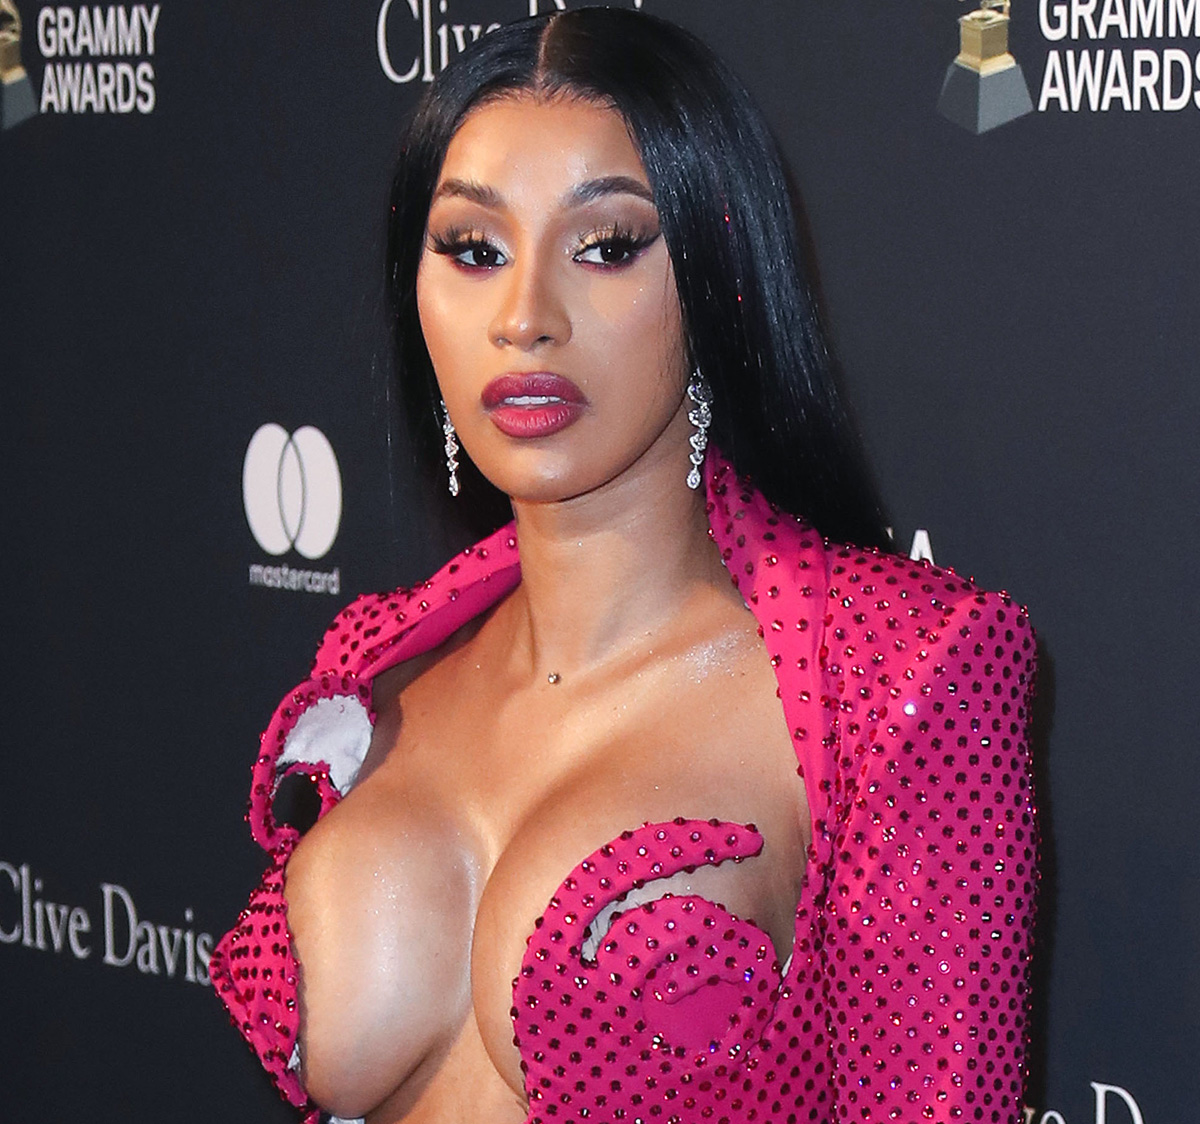 Cardi W Reveals She Felt 'Extremely Suicidal' In Shocking Testimony During YouTuber Libel Trial